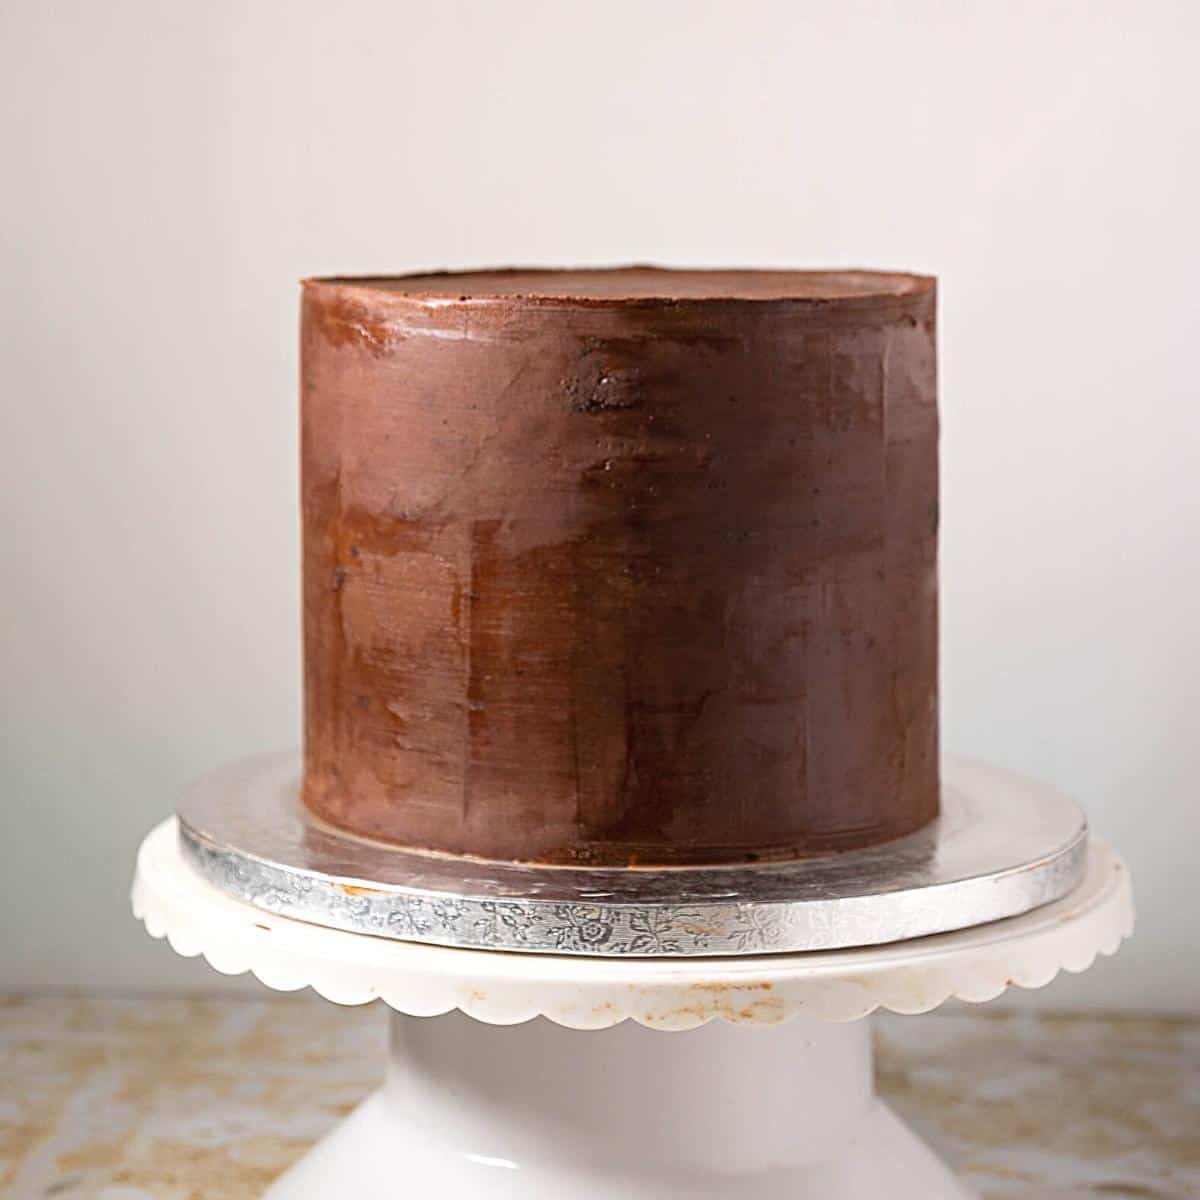 A cake frosted with sharp edges on ganache.